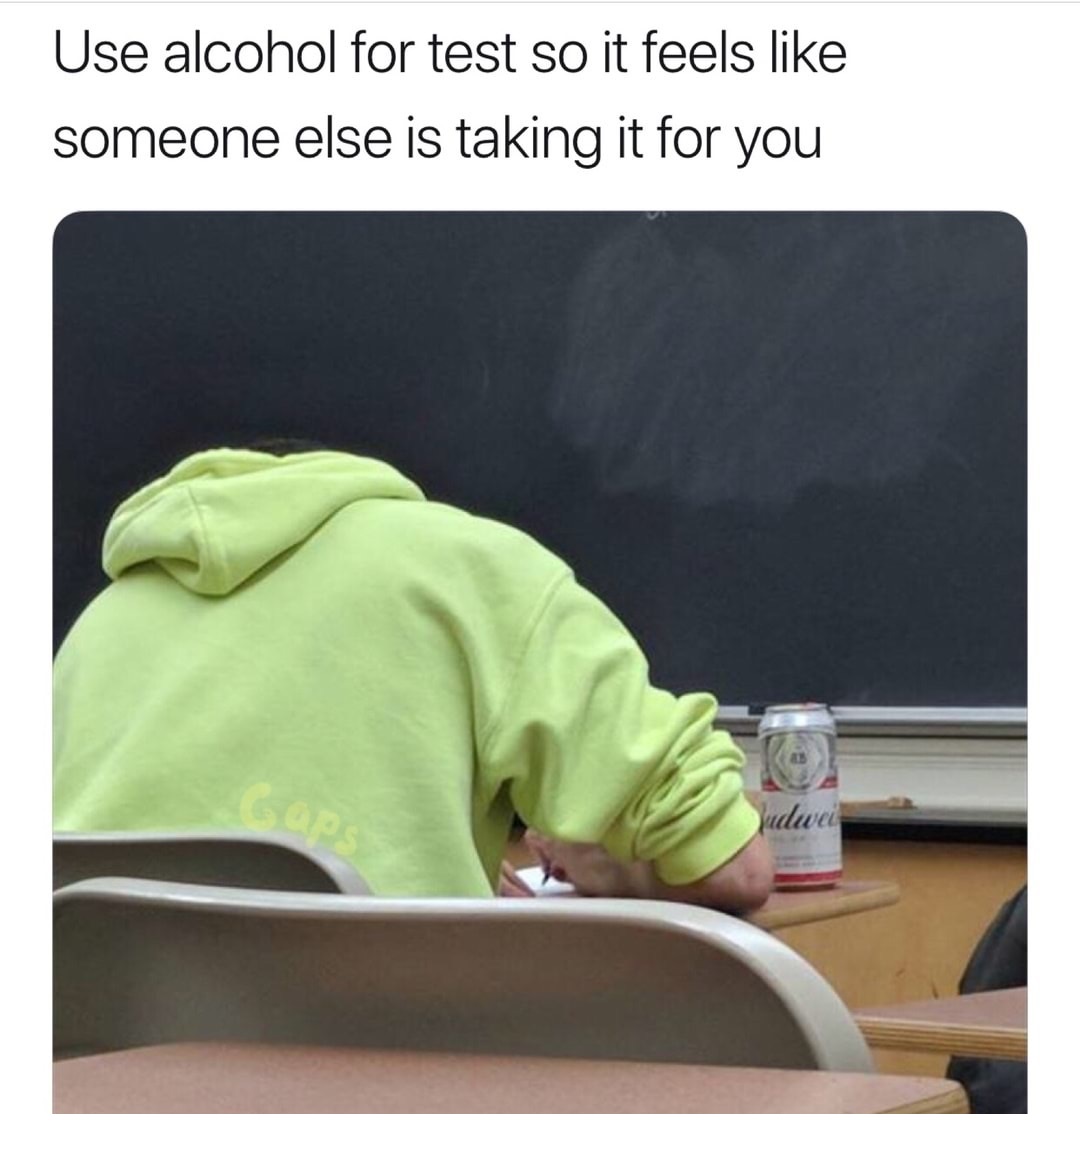 Laughter - Use alcohol for test so it feels someone else is taking it for you